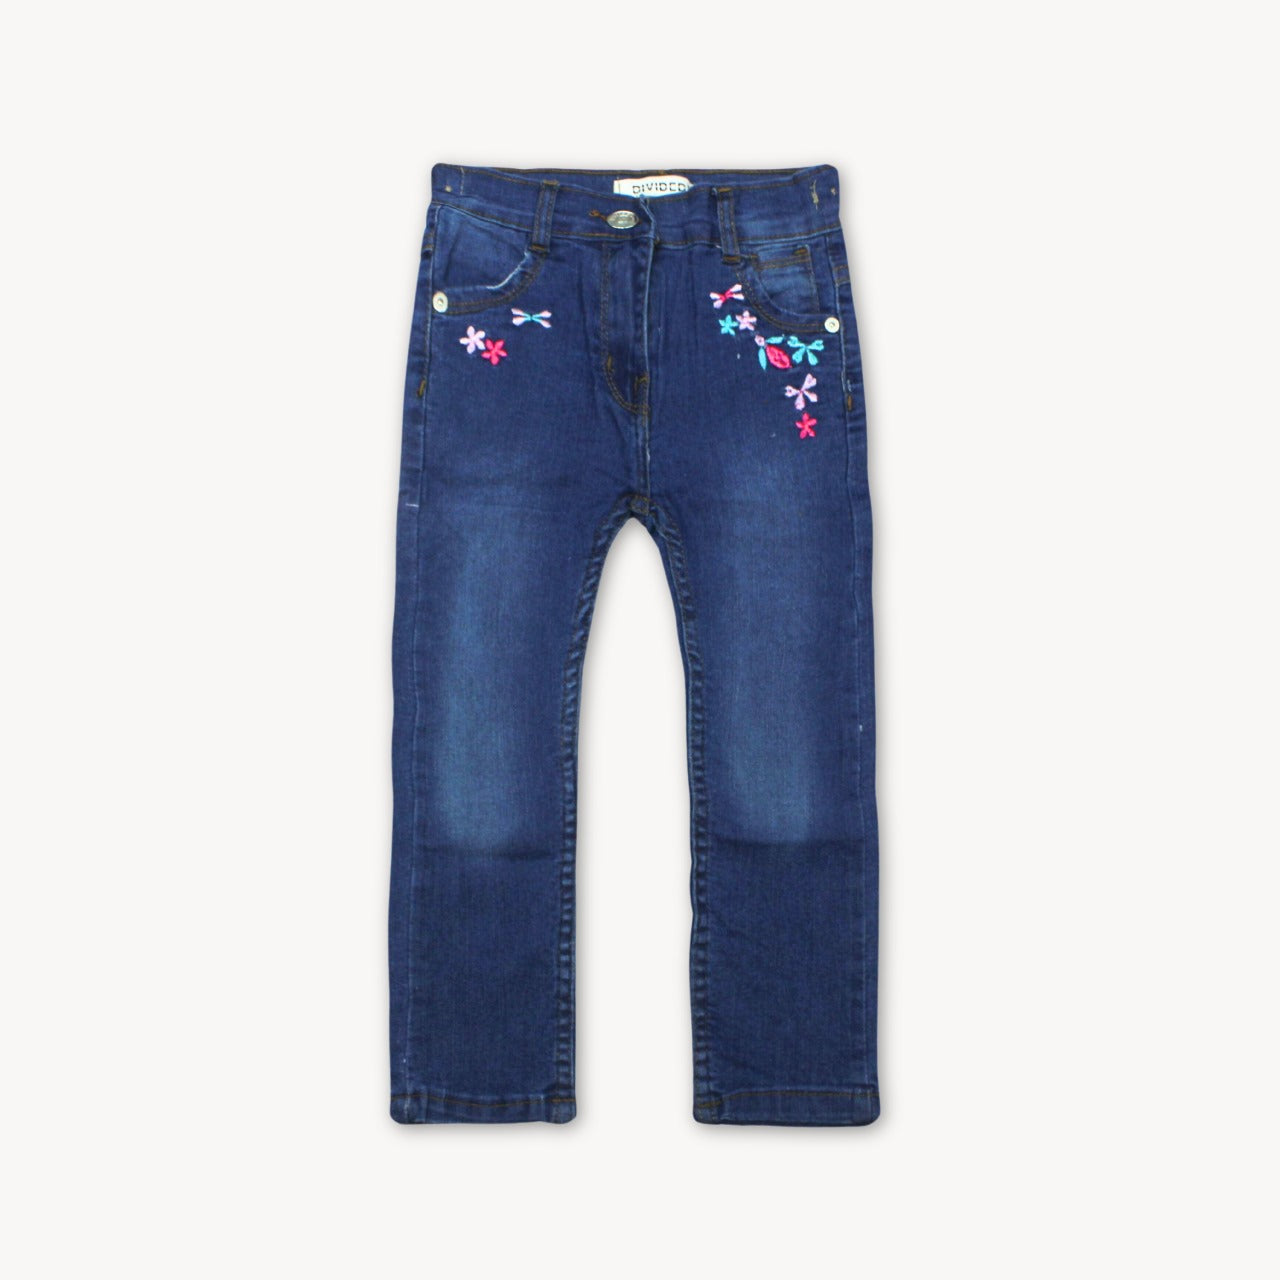 Navy Blue Floral and Ribbon Embroidered Denim Jeans